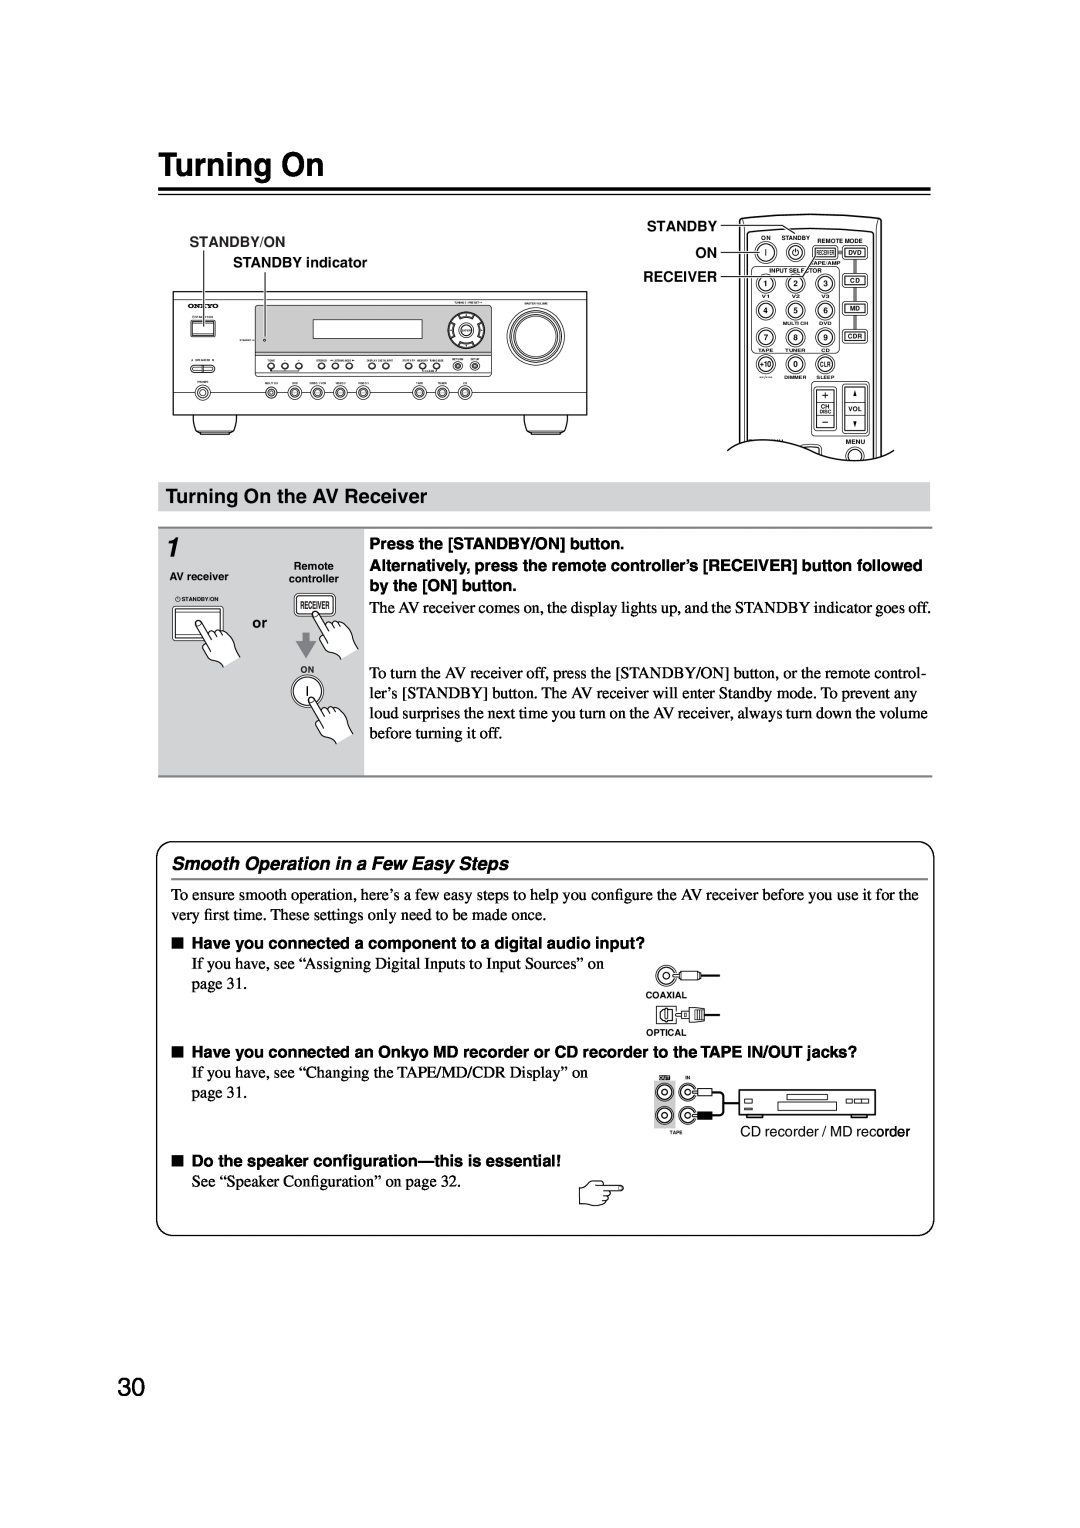 Onkyo TX-SR303E instruction manual Turning On the AV Receiver, Smooth Operation in a Few Easy Steps 